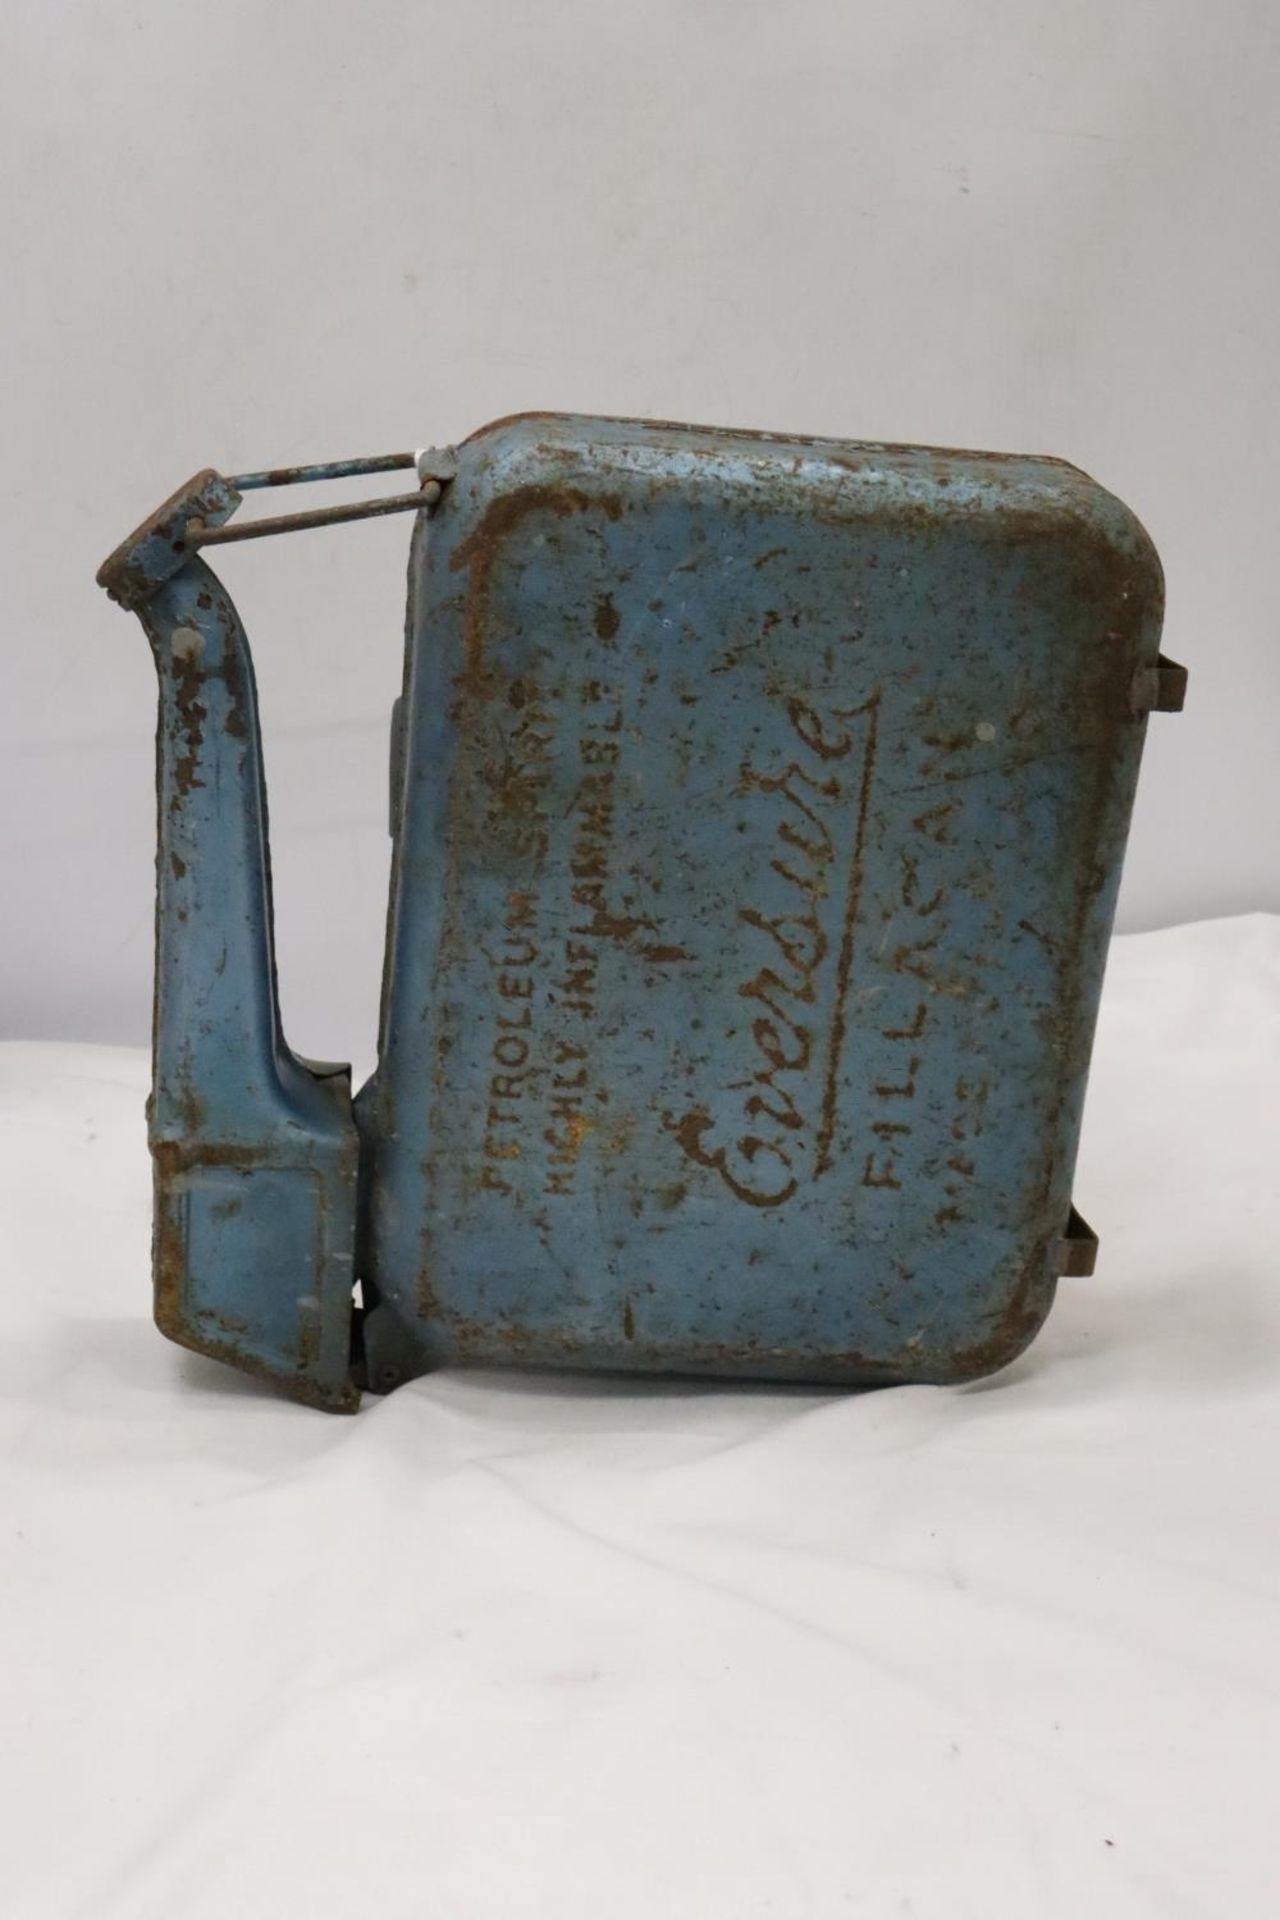 A VINTAGE EVERSURE PETROL CAN - Image 3 of 5